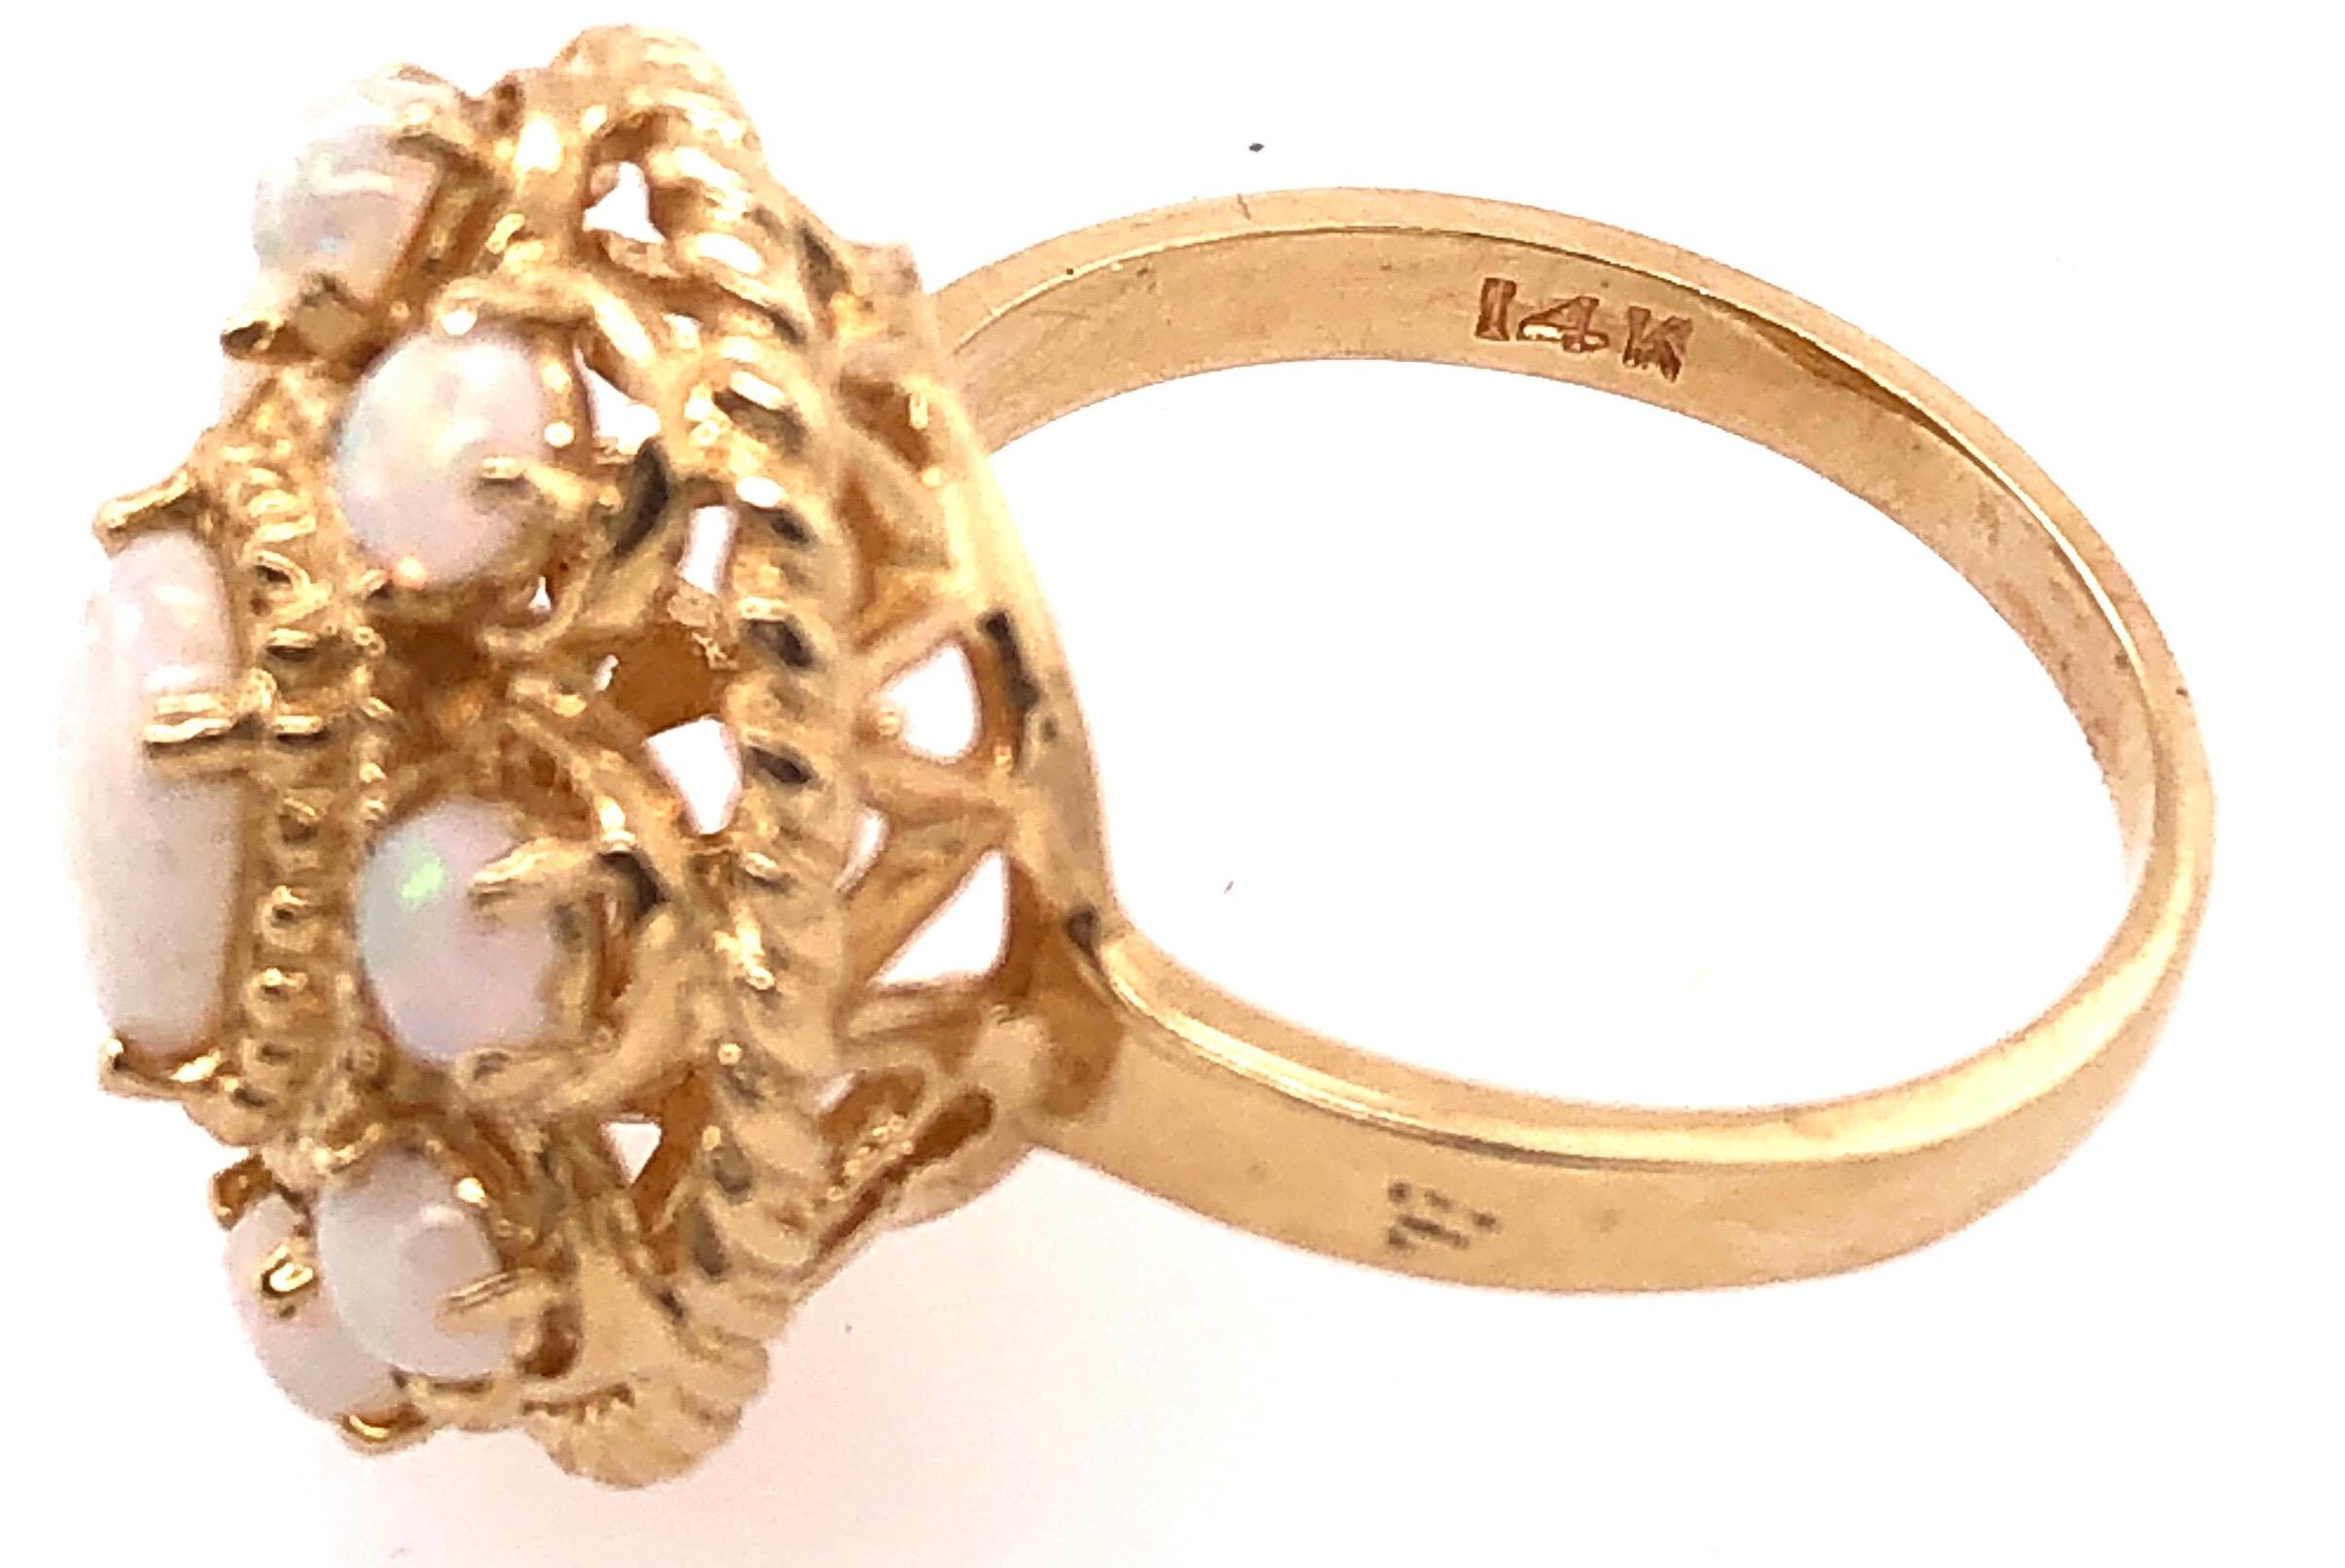 14 Karat Yellow Gold Ring With Opal Cluster.
Size 8.75
8.9 grams total weight.